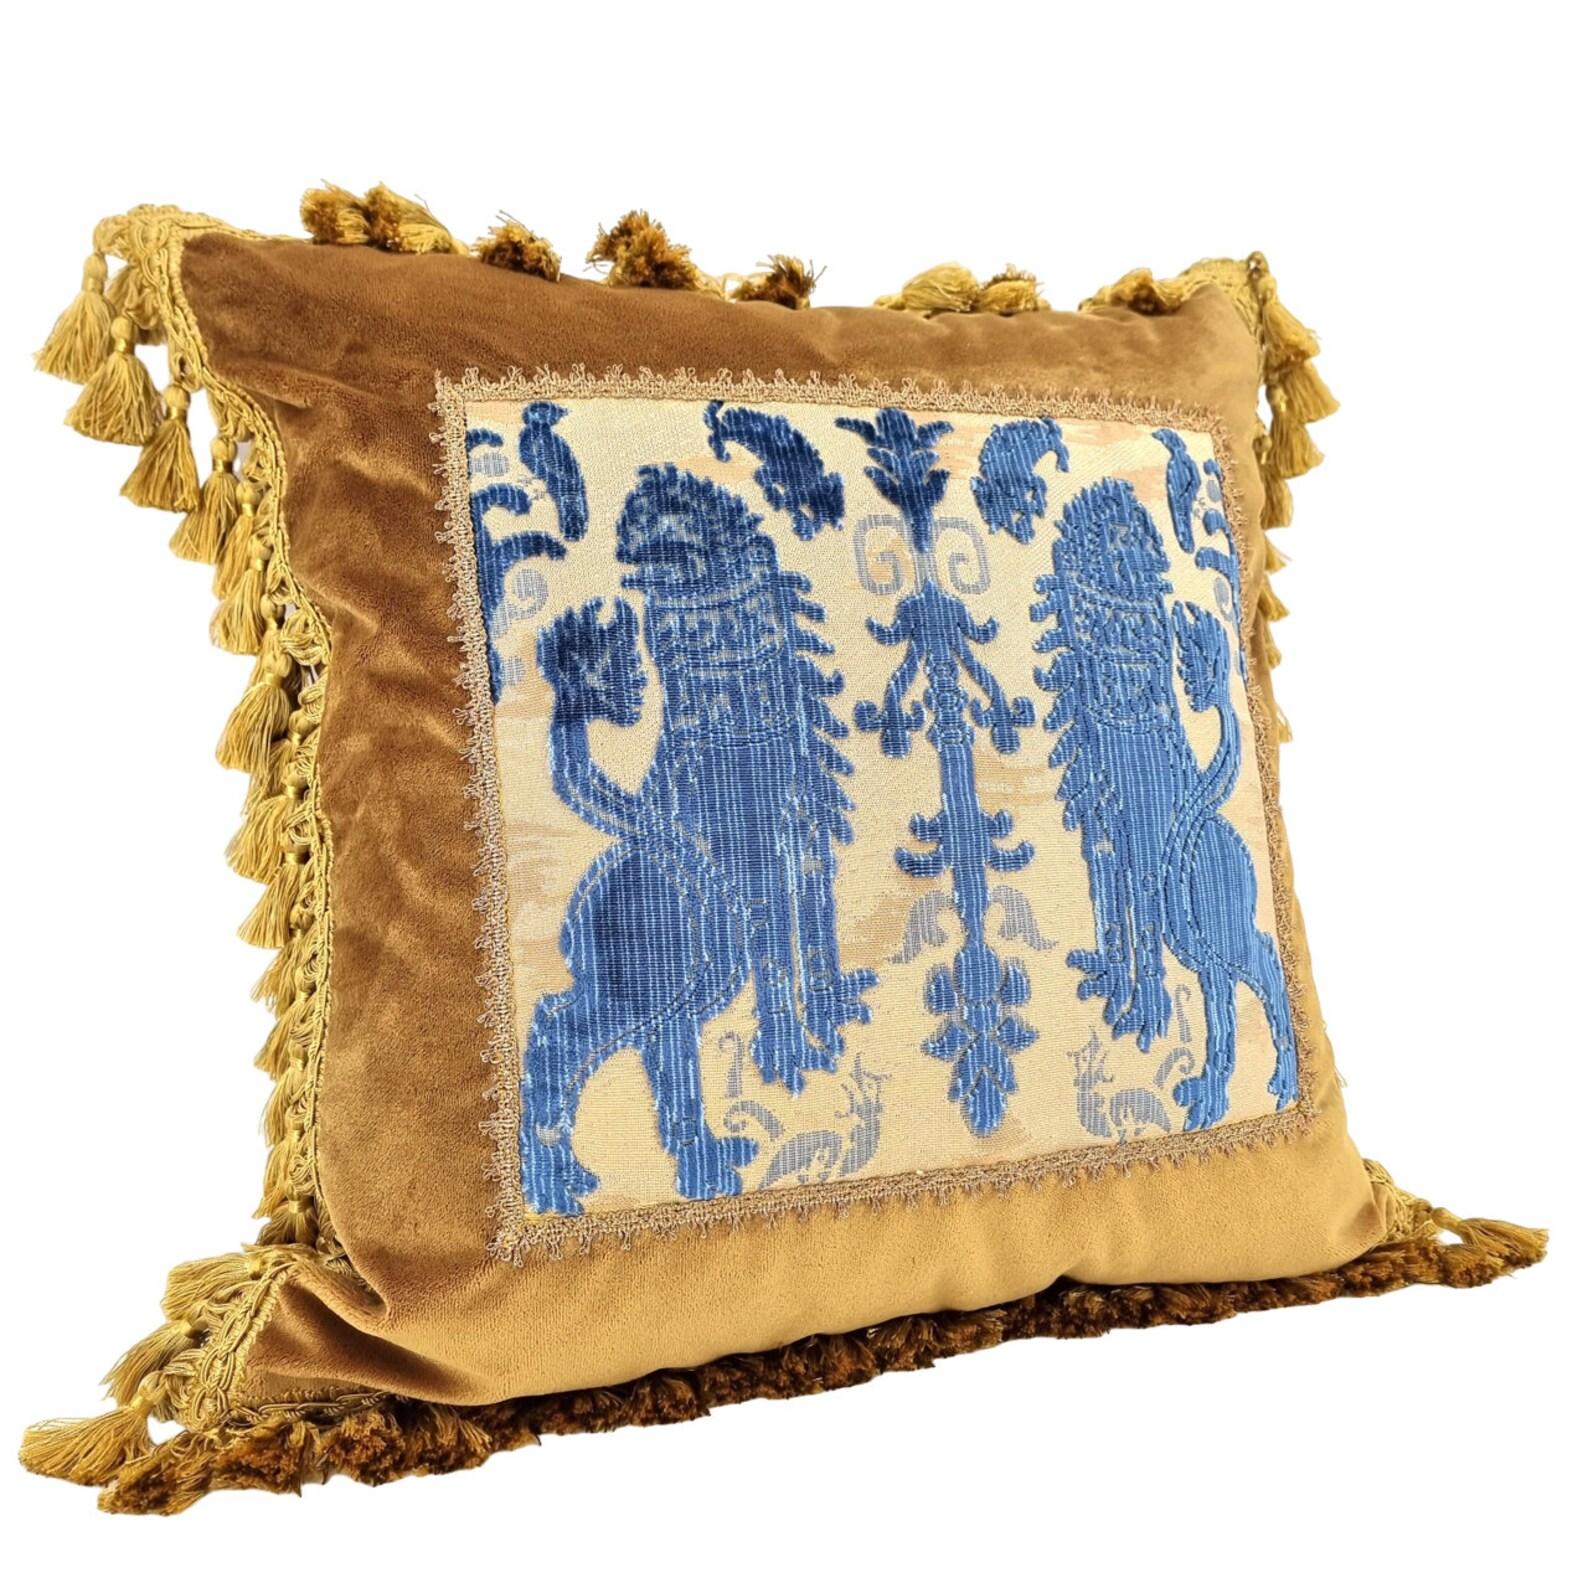 This amazing decorative pillow with gold tassel trim all around the four edges is handmade using Rubelli velvet in antique gold color embellished with front positioned panel in Luigi Bevilacqua indigo blue silk heddle velvet 